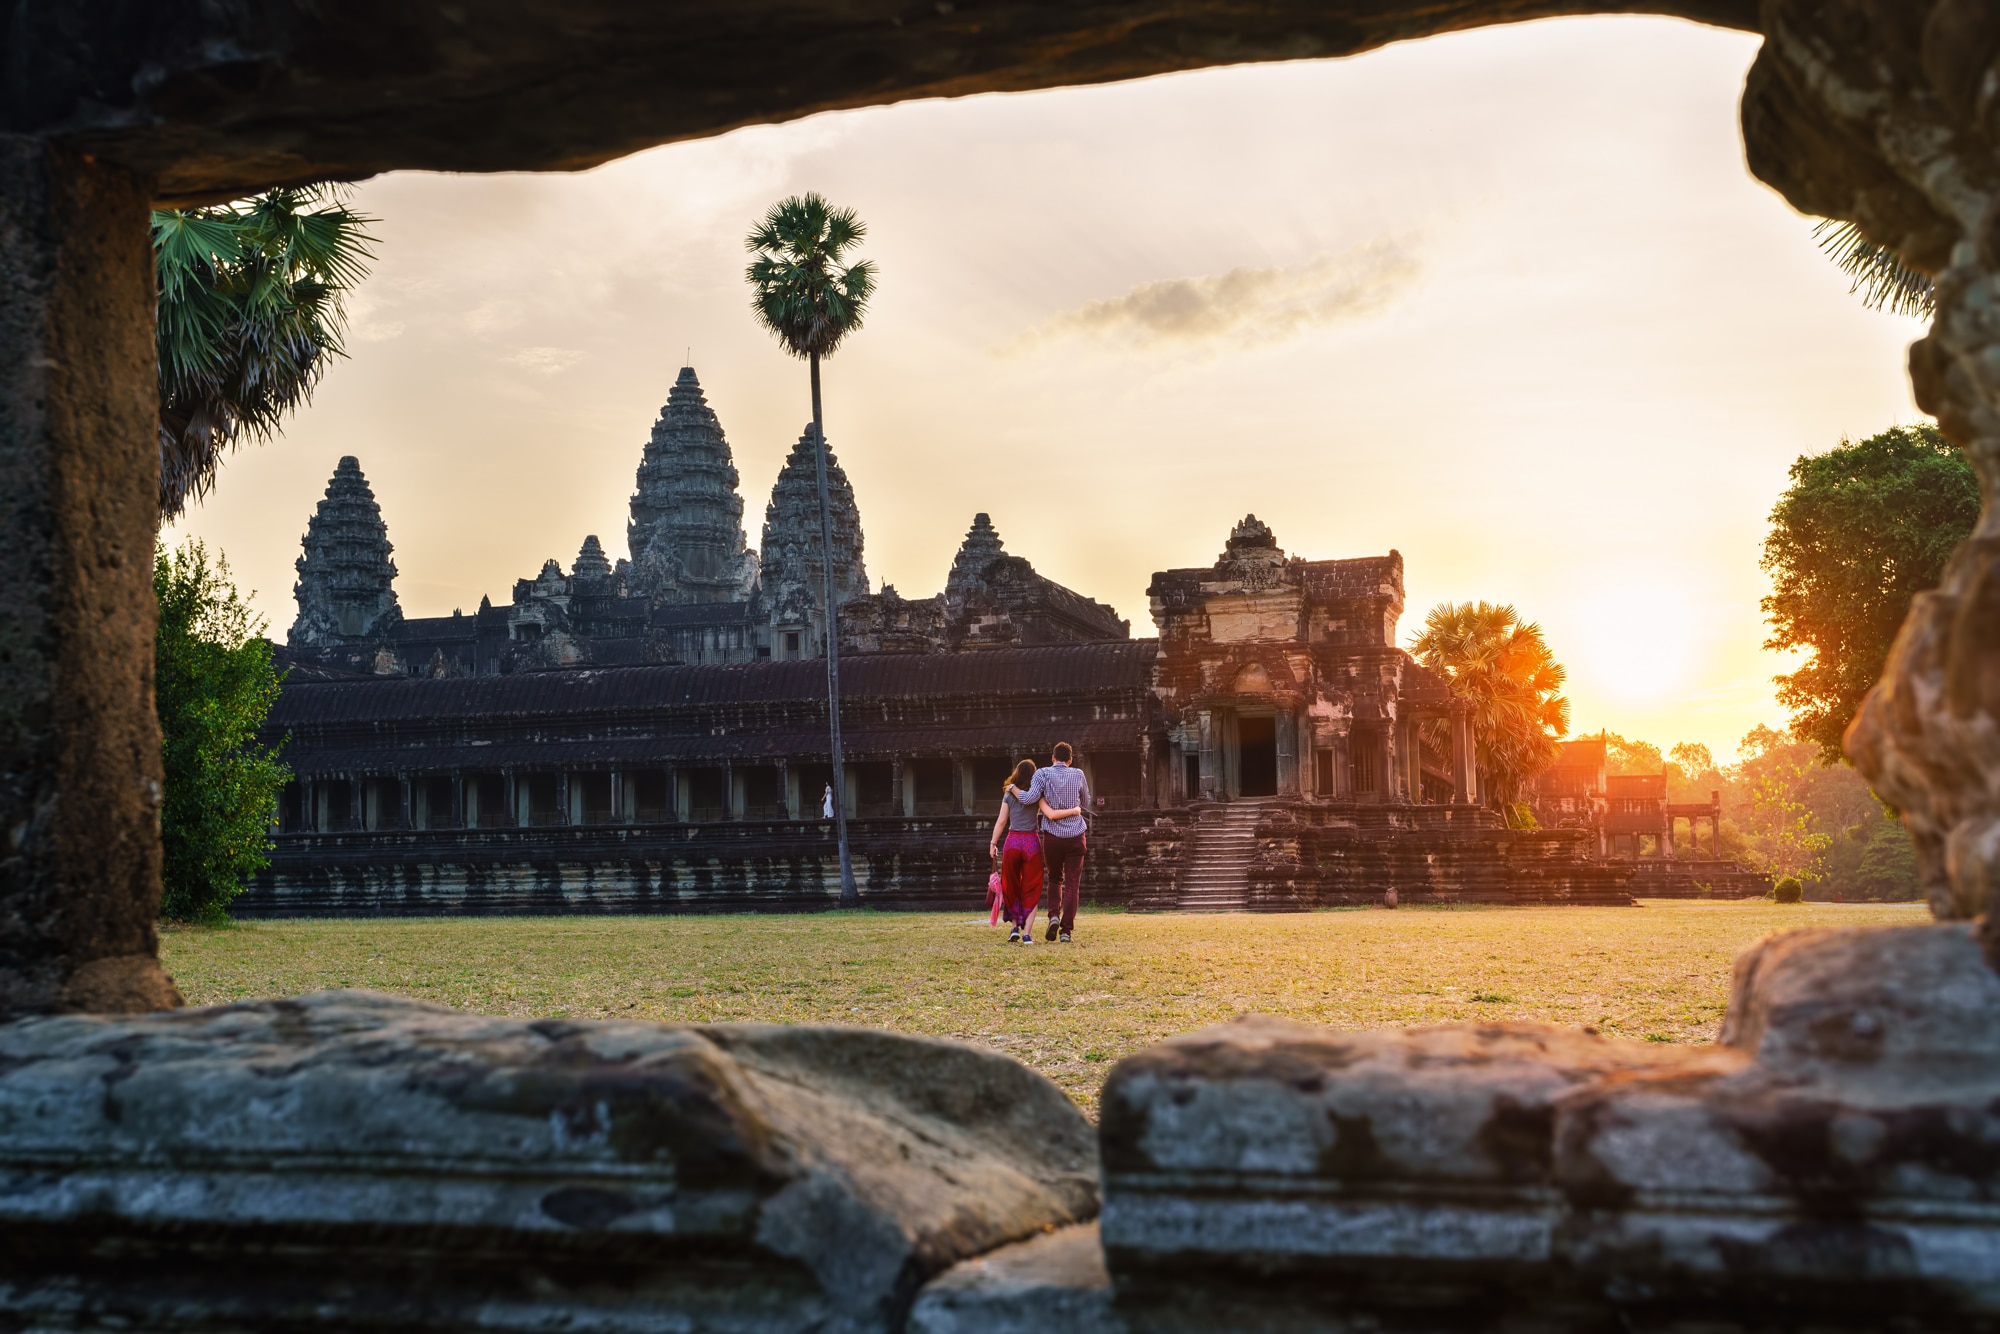 Travel-couple-in-Angkor-Wat-at-sunrise-moment-Siem-Reap-Cambodia.jpg